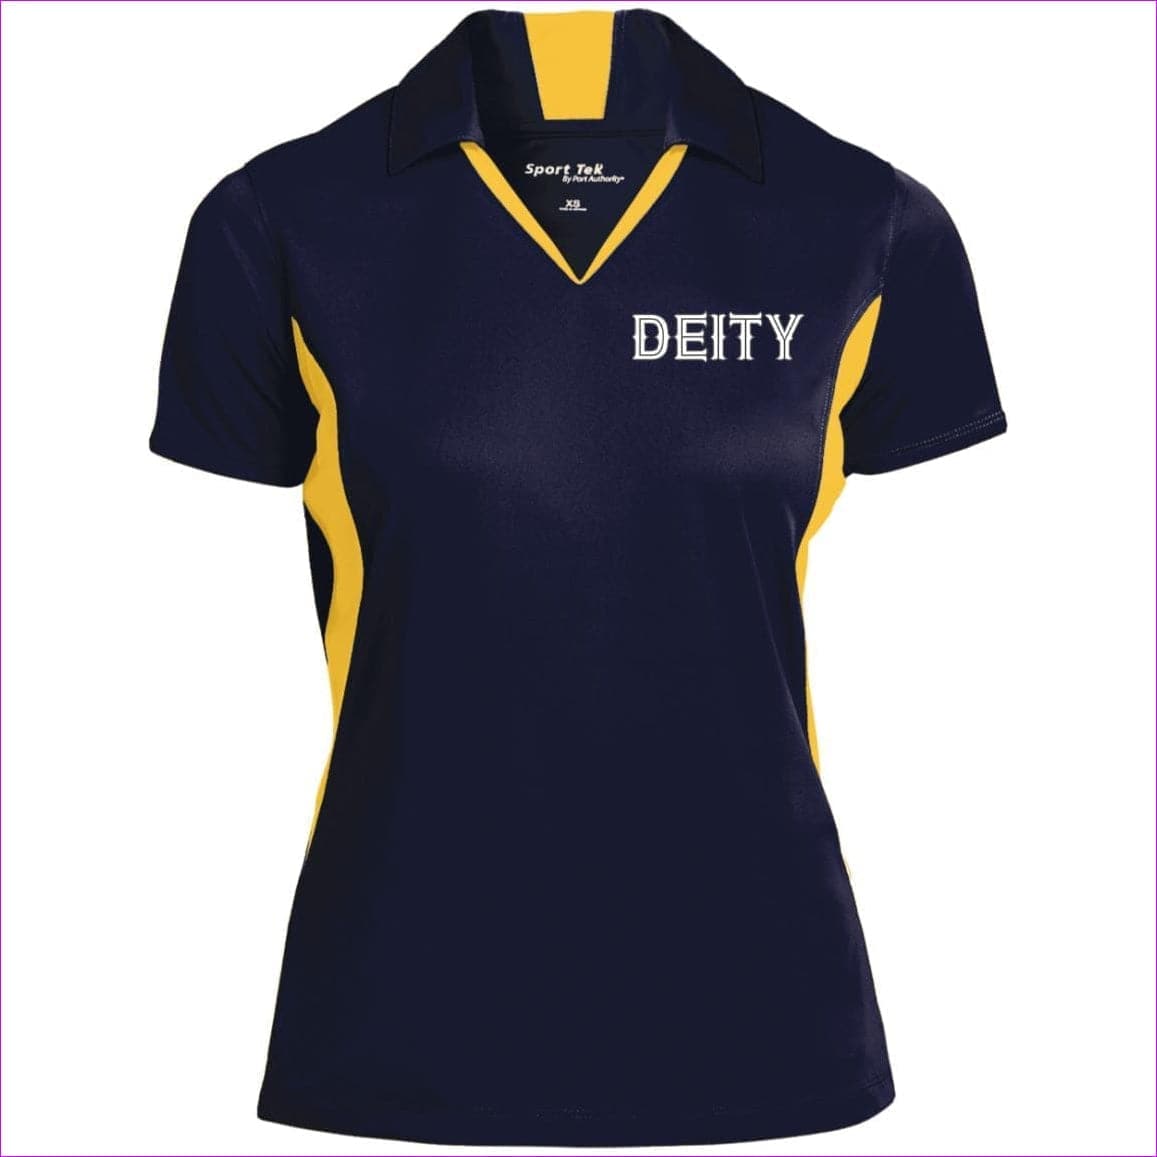 True Navy Gold - Deity Ladies' Colorblock Performance Polo - Womens Polo Shirts at TFC&H Co.